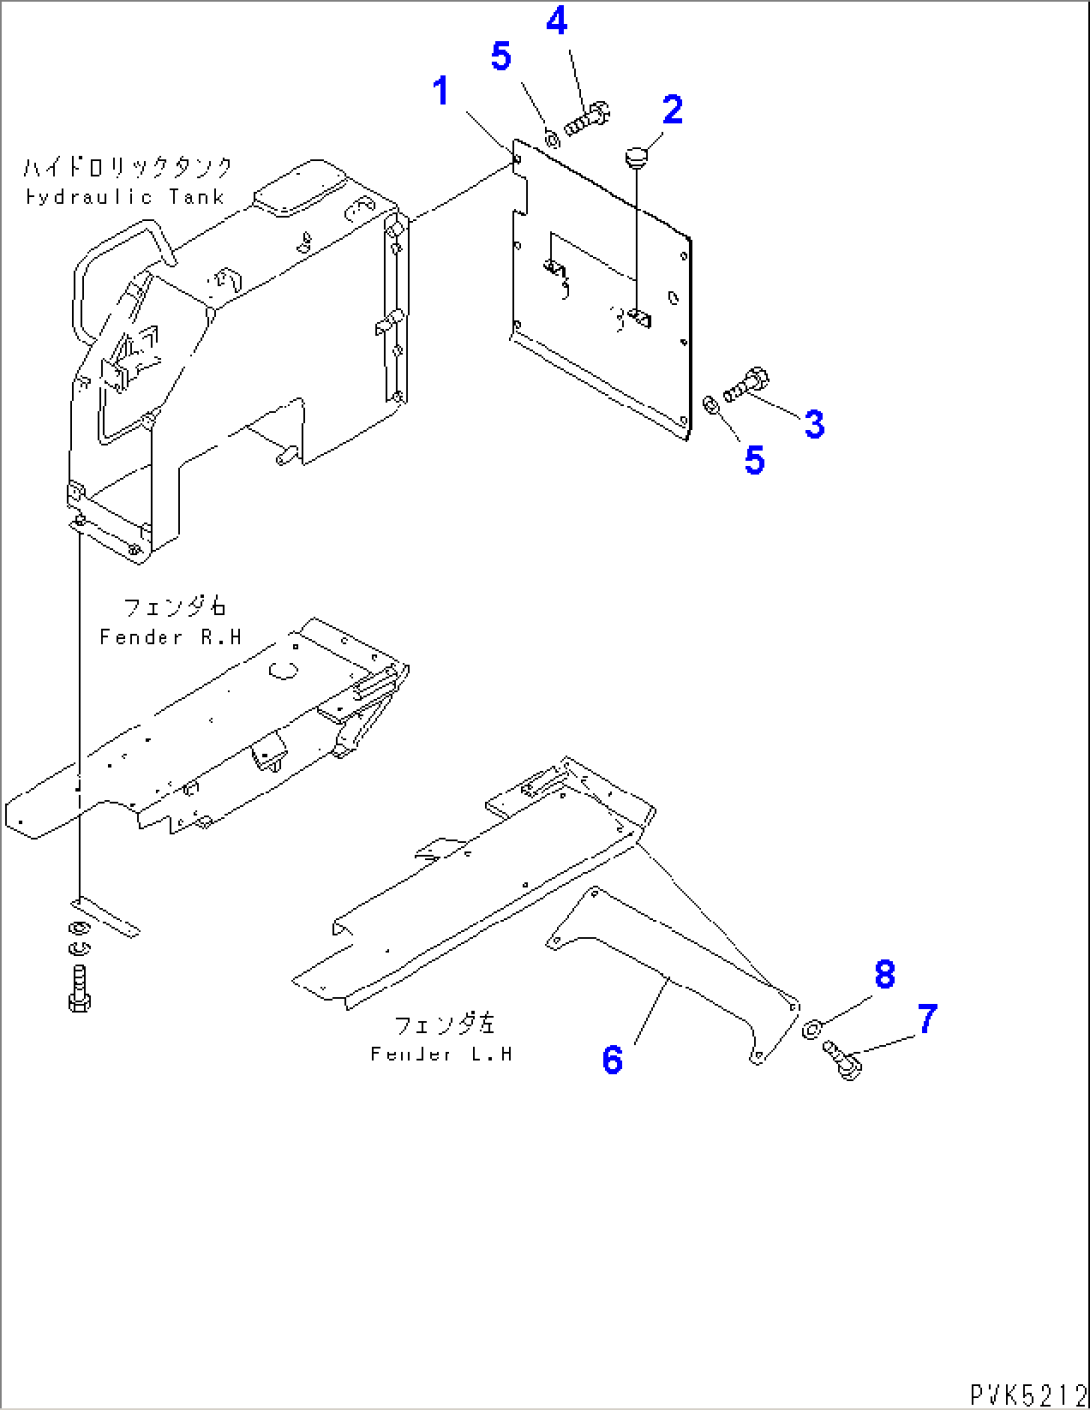 REAR COVER (FOR 3-POINT HITCH) (FOR 2-PILLER TYPE CANOPY)